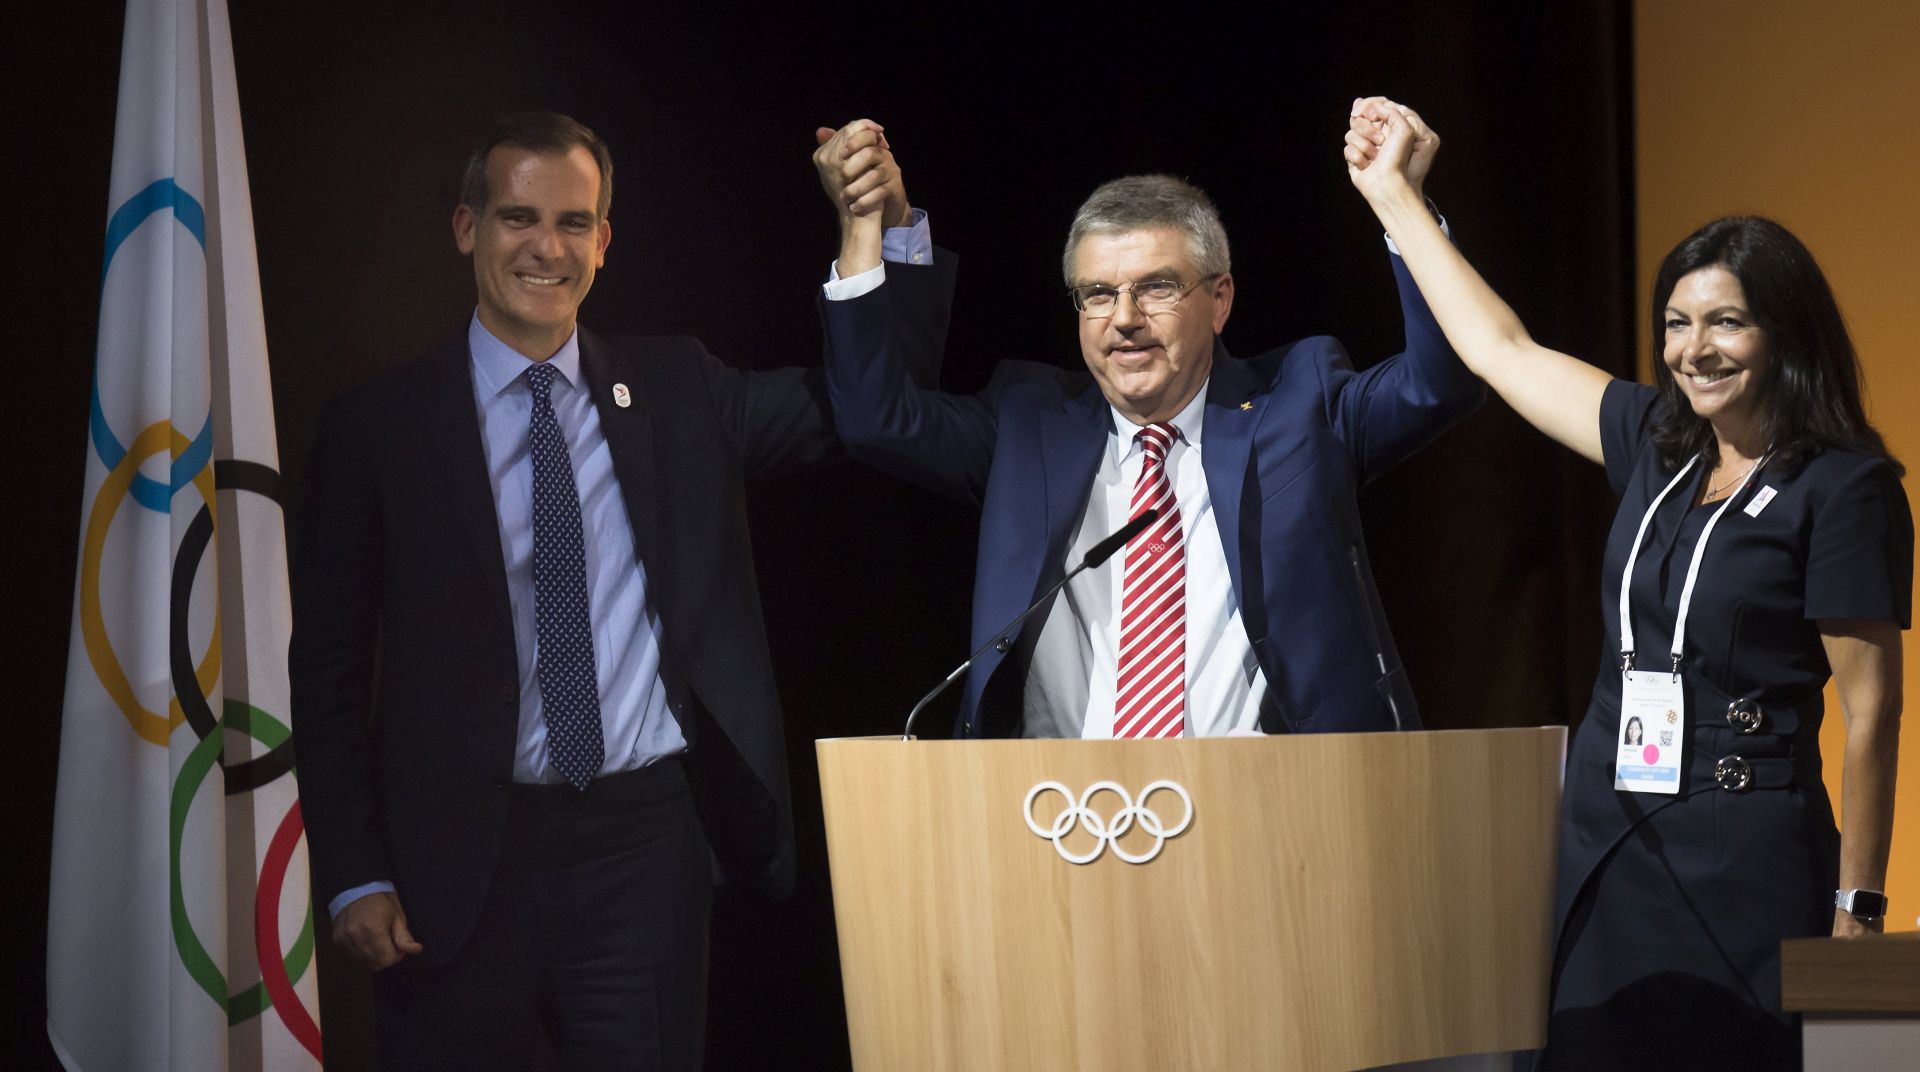 epa06081510 (L-R) Mayor of Los Angeles Eric Garcetti, International Olympic Committee (IOC) President Thomas Bach, and Paris Mayoress Anne Hidalgo pose together during the International Olympic Committee (IOC) Extraordinary Session, at the SwissTech Convention Centre, in Lausanne, Switzerland, 11 July 2017. The session decided to adopt the proposal of the Executive Board to award the Olympic Games 2024 and 2028 at the same time,  EPA/JEAN-CHRISTOPHE BOTT